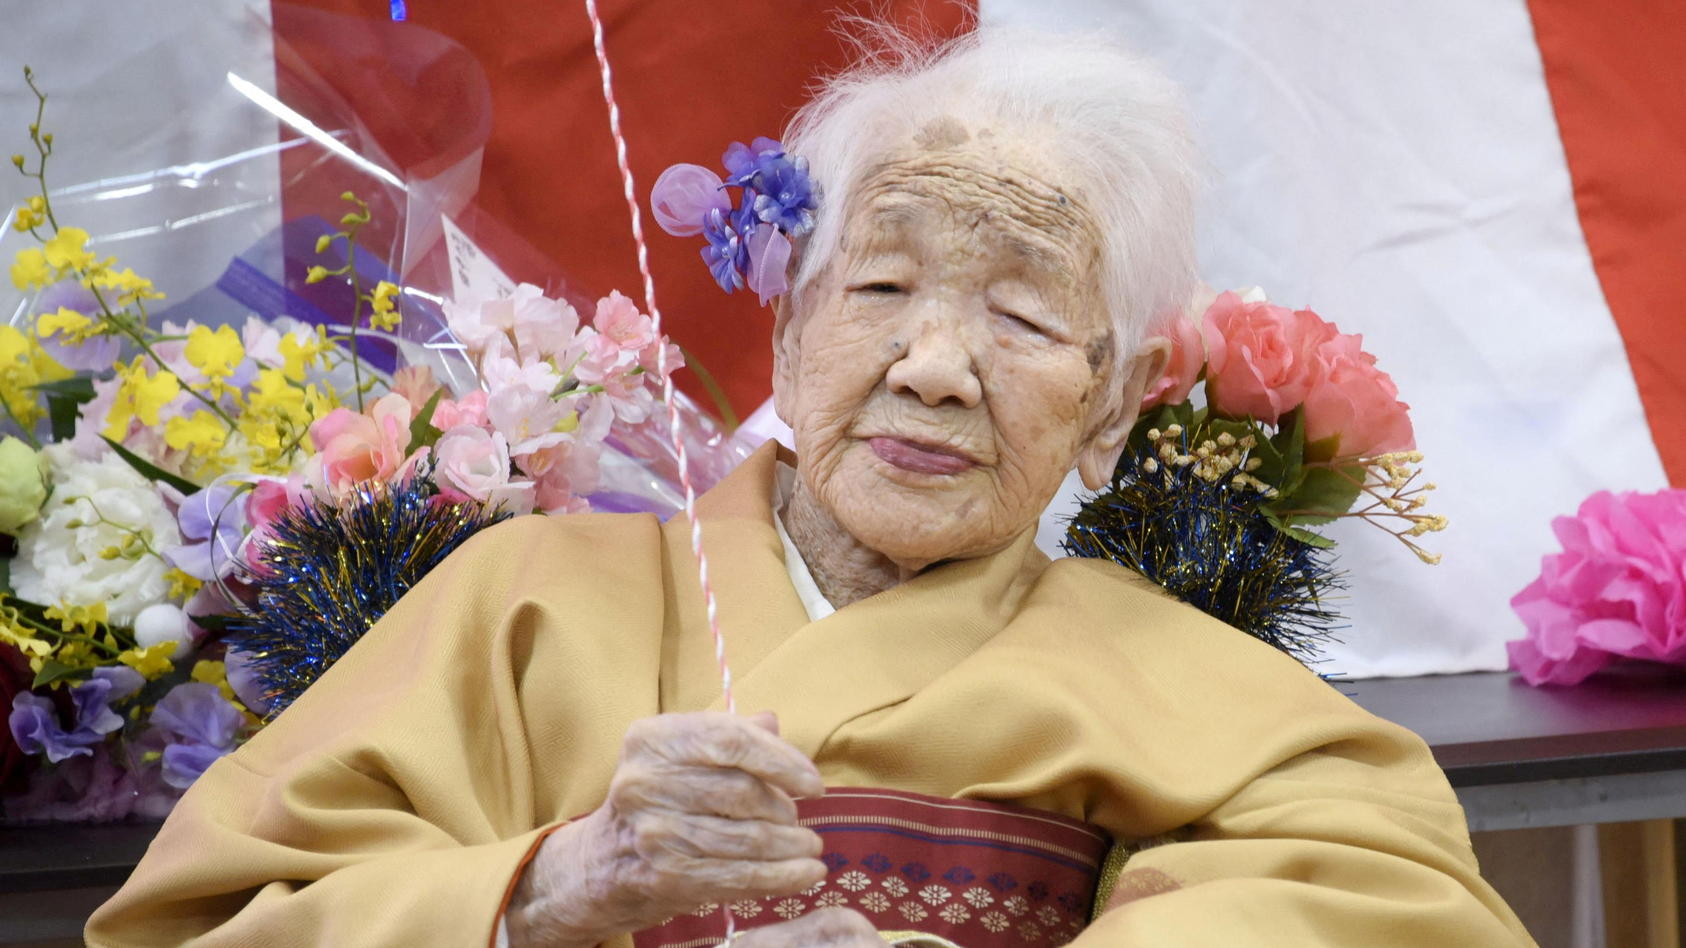 FILE PHOTO: Kane Tanaka, born in 1903, smiles as a nursing home celebrates three days after her 117th birthday in Fukuoka, Japan, in this photo taken by Kyodo January 5, 2020. Mandatory credit Kyodo/via REUTERS ATTENTION EDITORS - THIS IMAGE WAS PROV